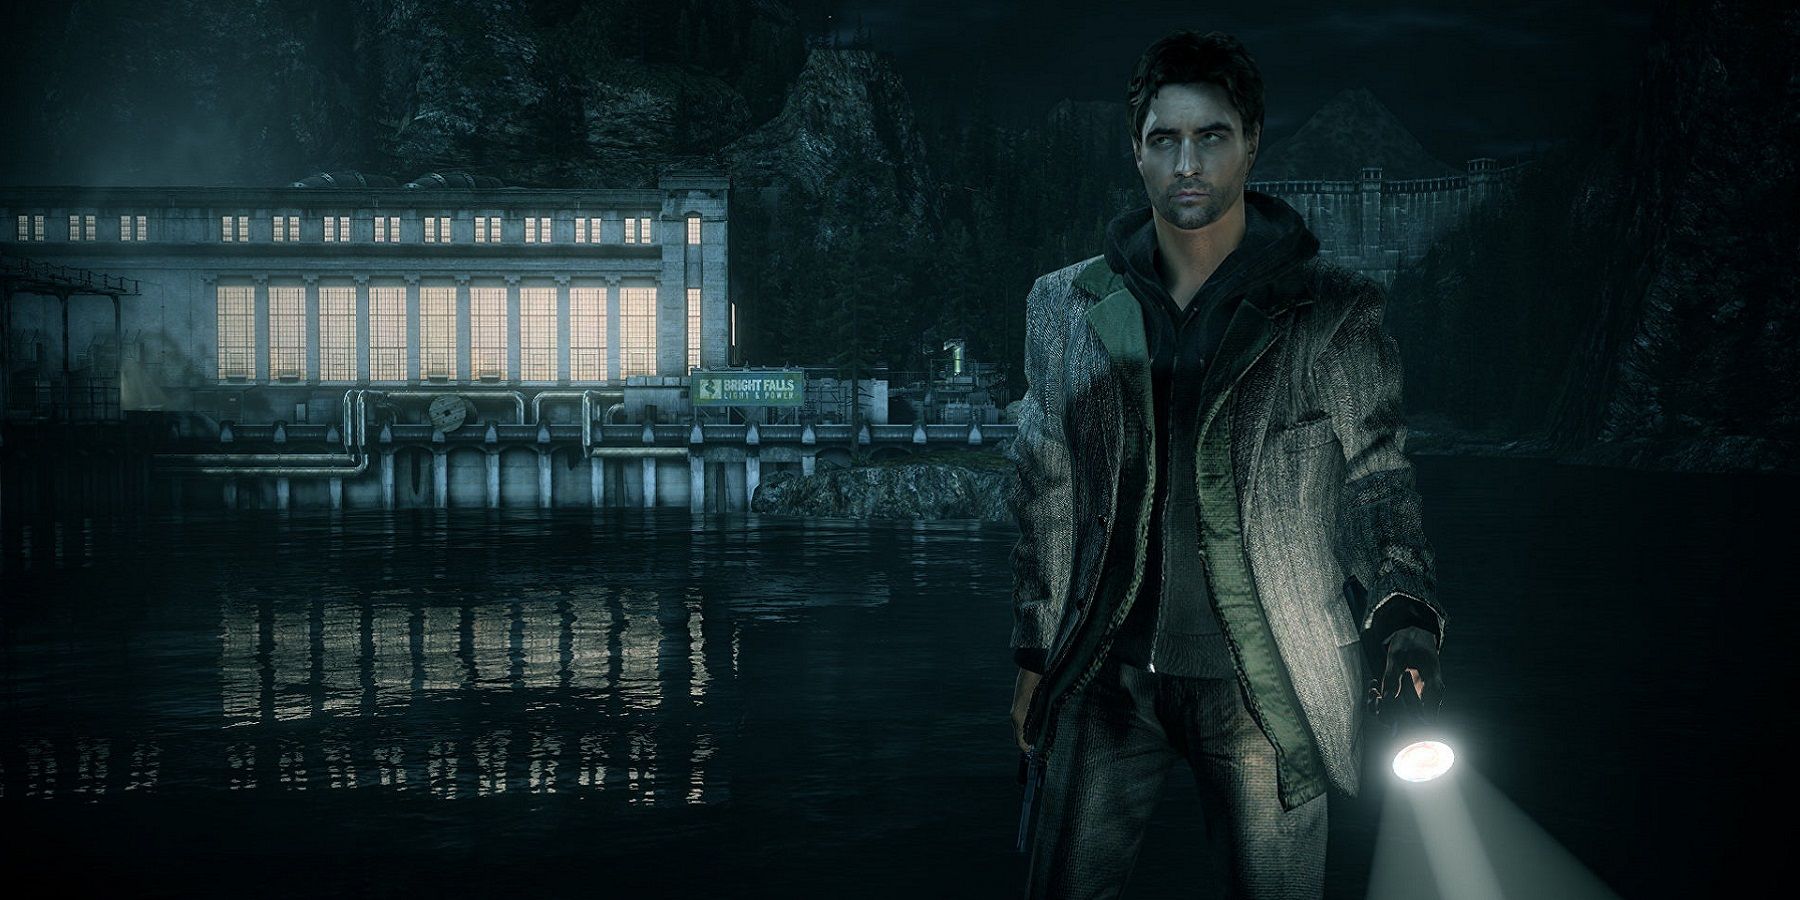 Image from Alan Wake showing the titular chatacter outside in the dark with a lit flashlight.